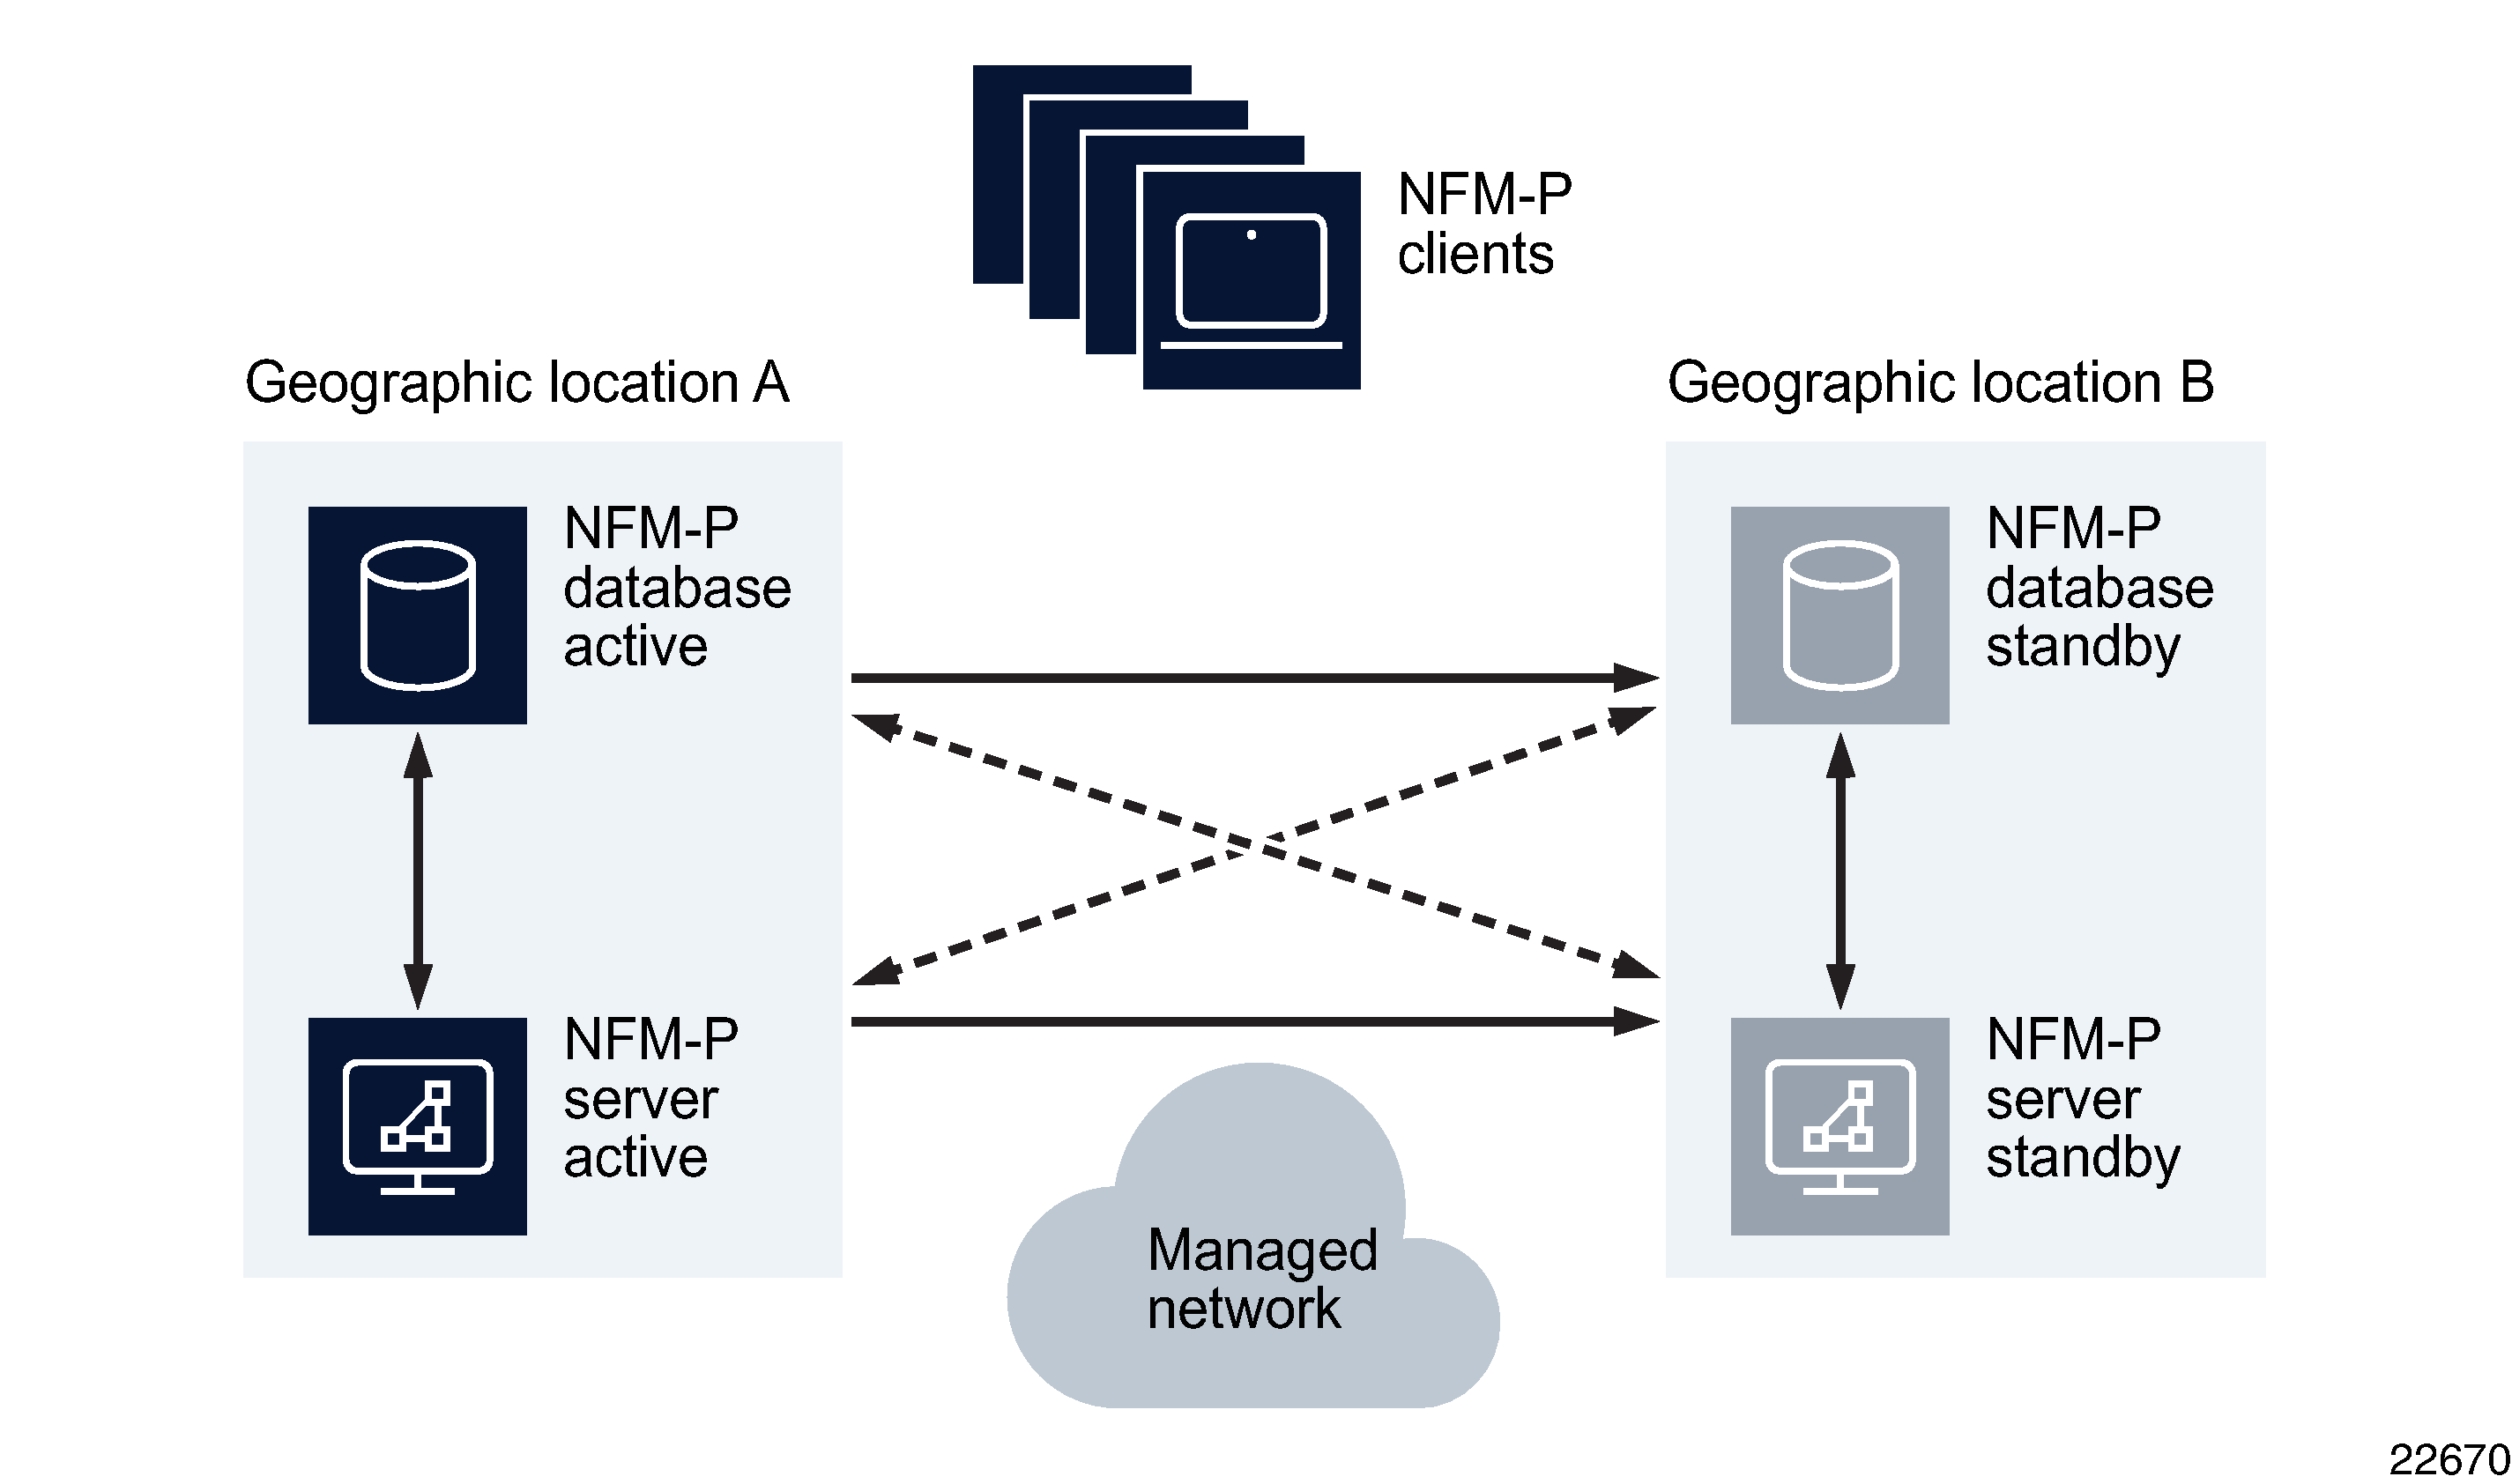 NFM-P distributed server/database redundancy deployment in a geographically redundant setup.